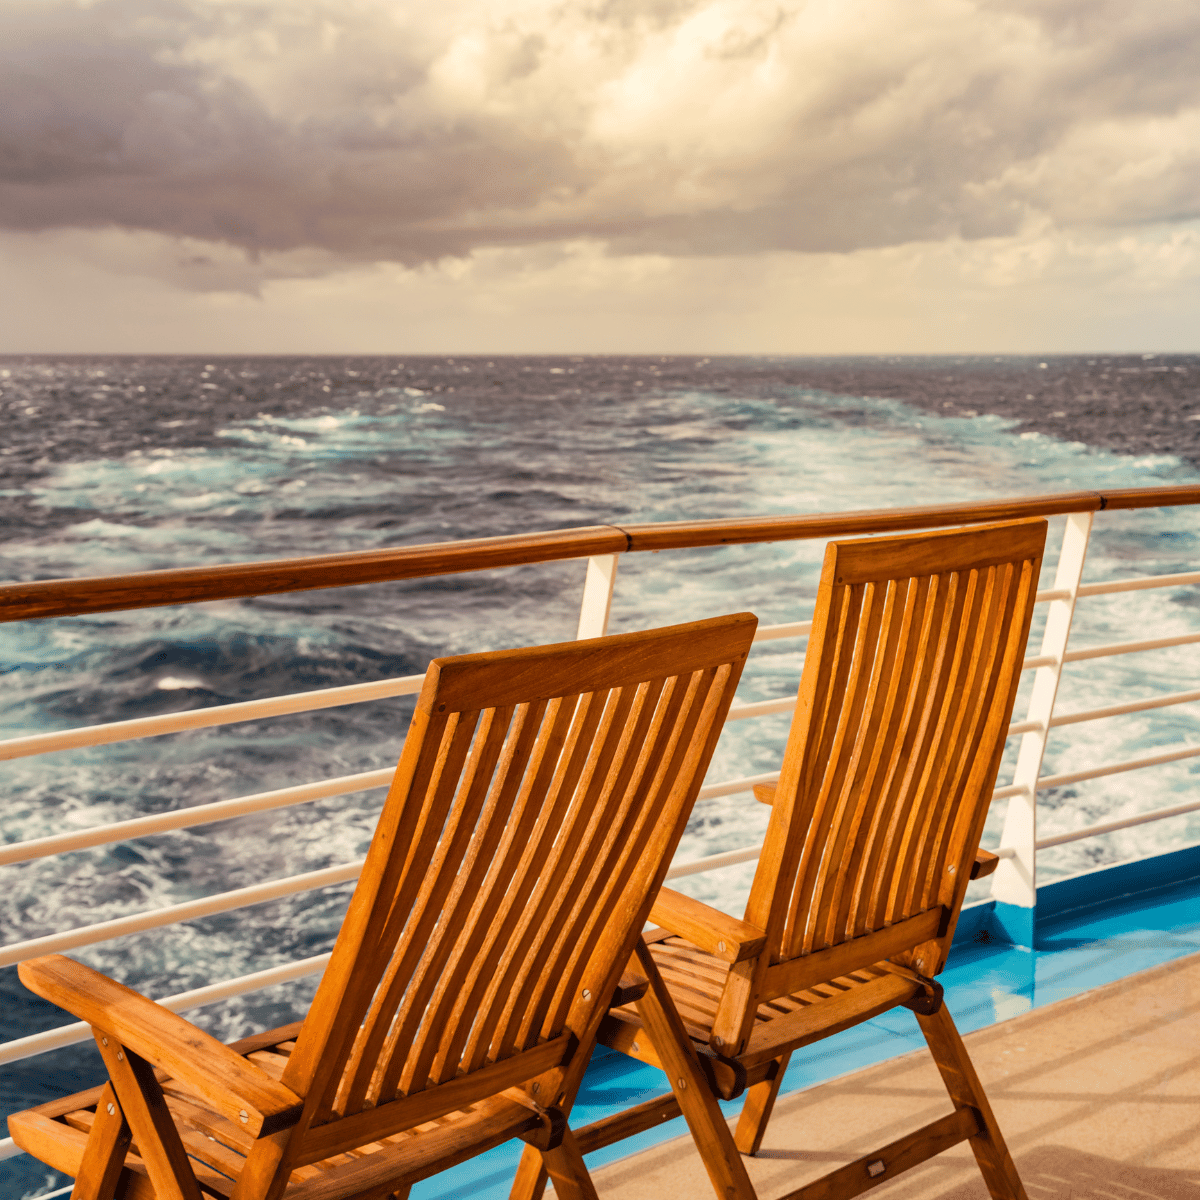 Cruise SHip Balcony with chairs